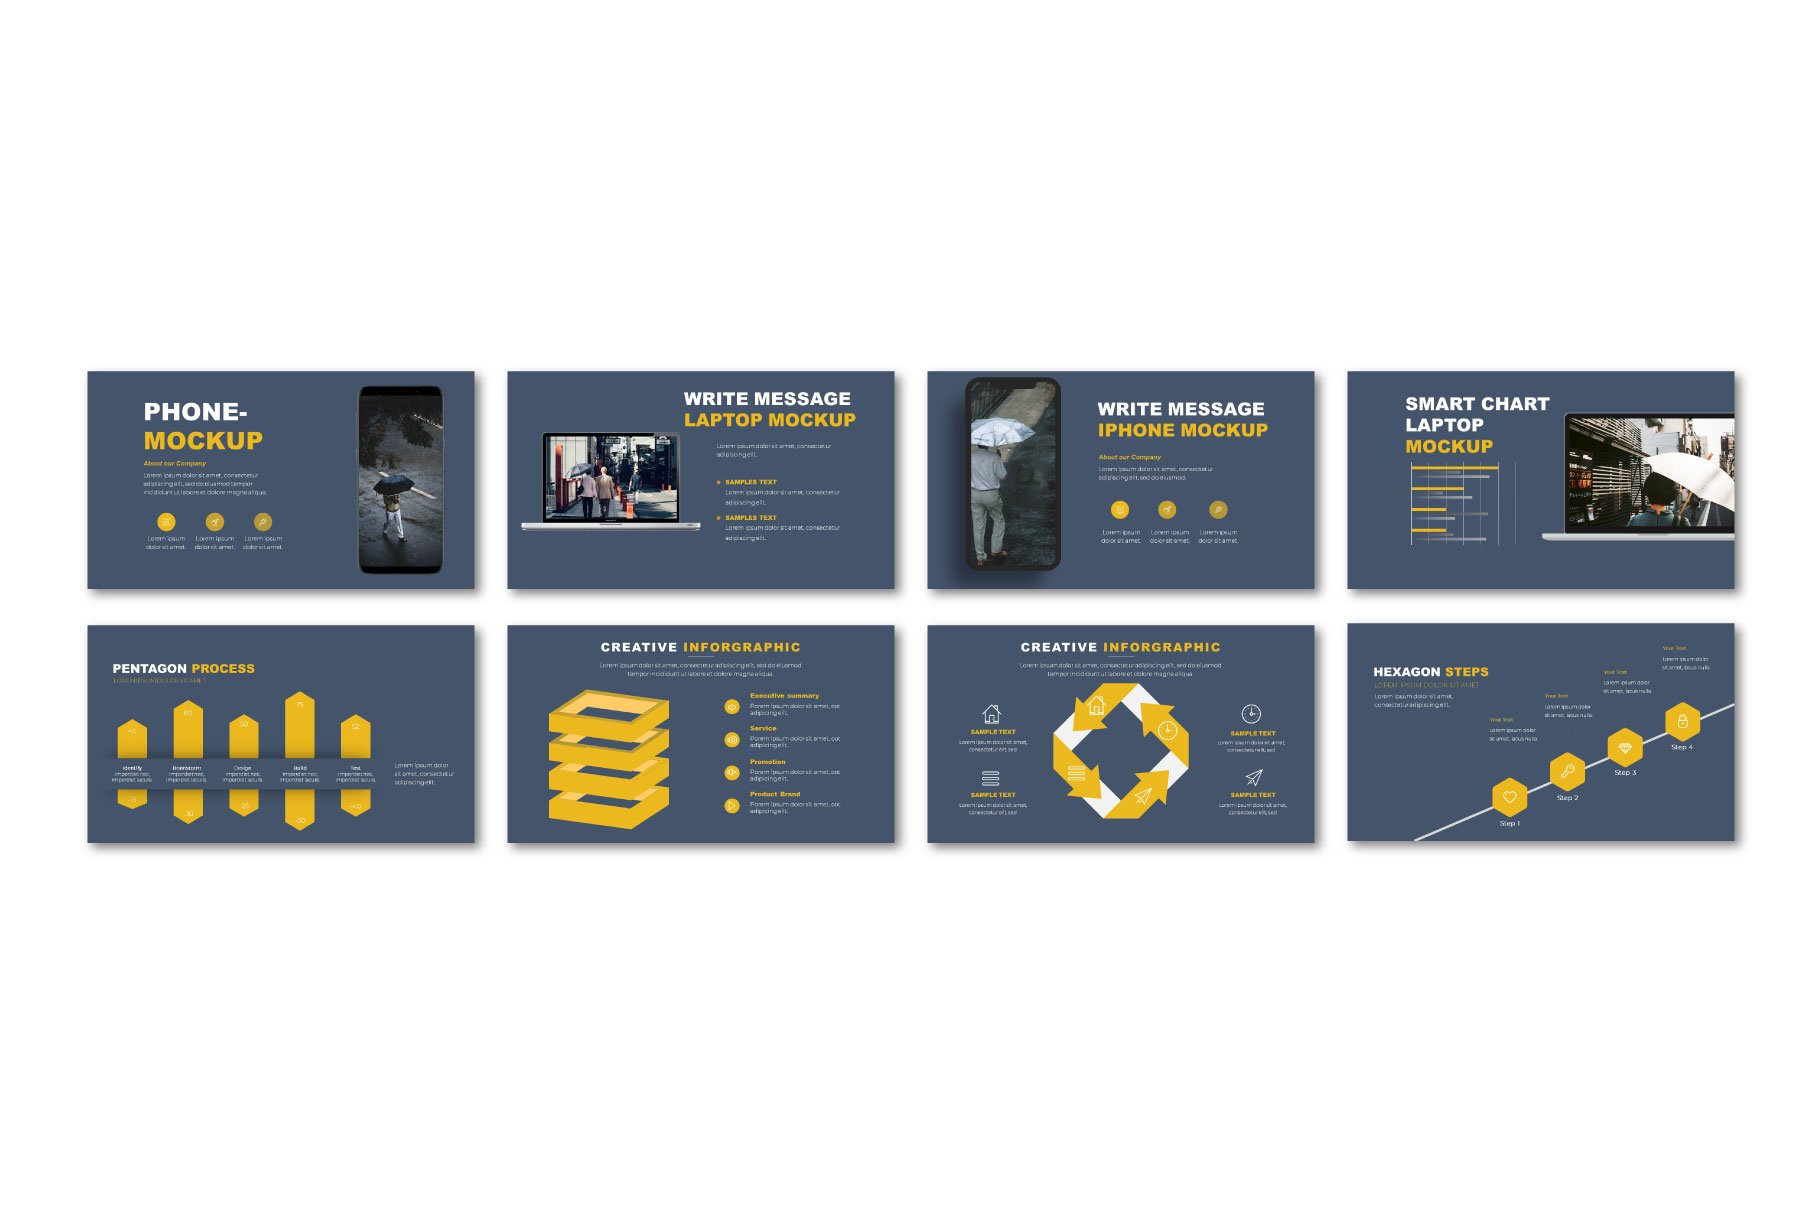 Umbrella template includes yellow infographics collection which you can use for your purposes.